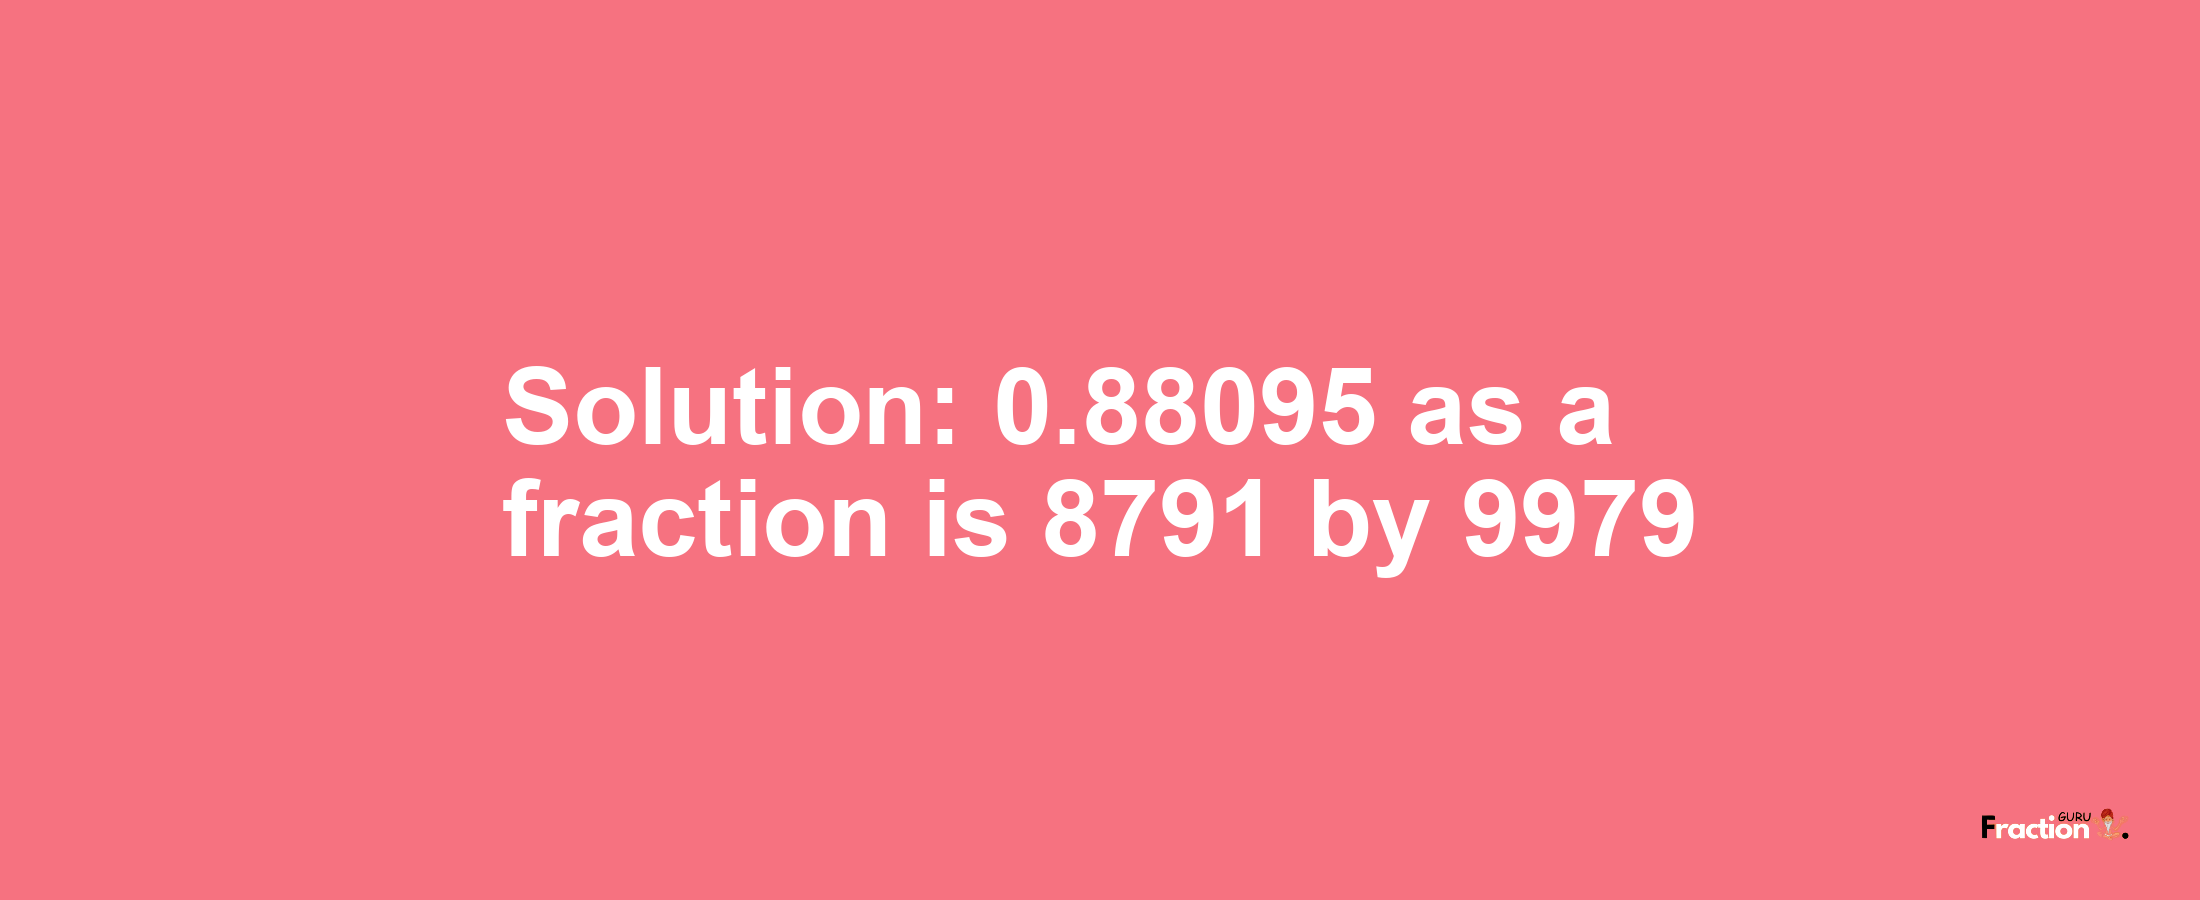 Solution:0.88095 as a fraction is 8791/9979